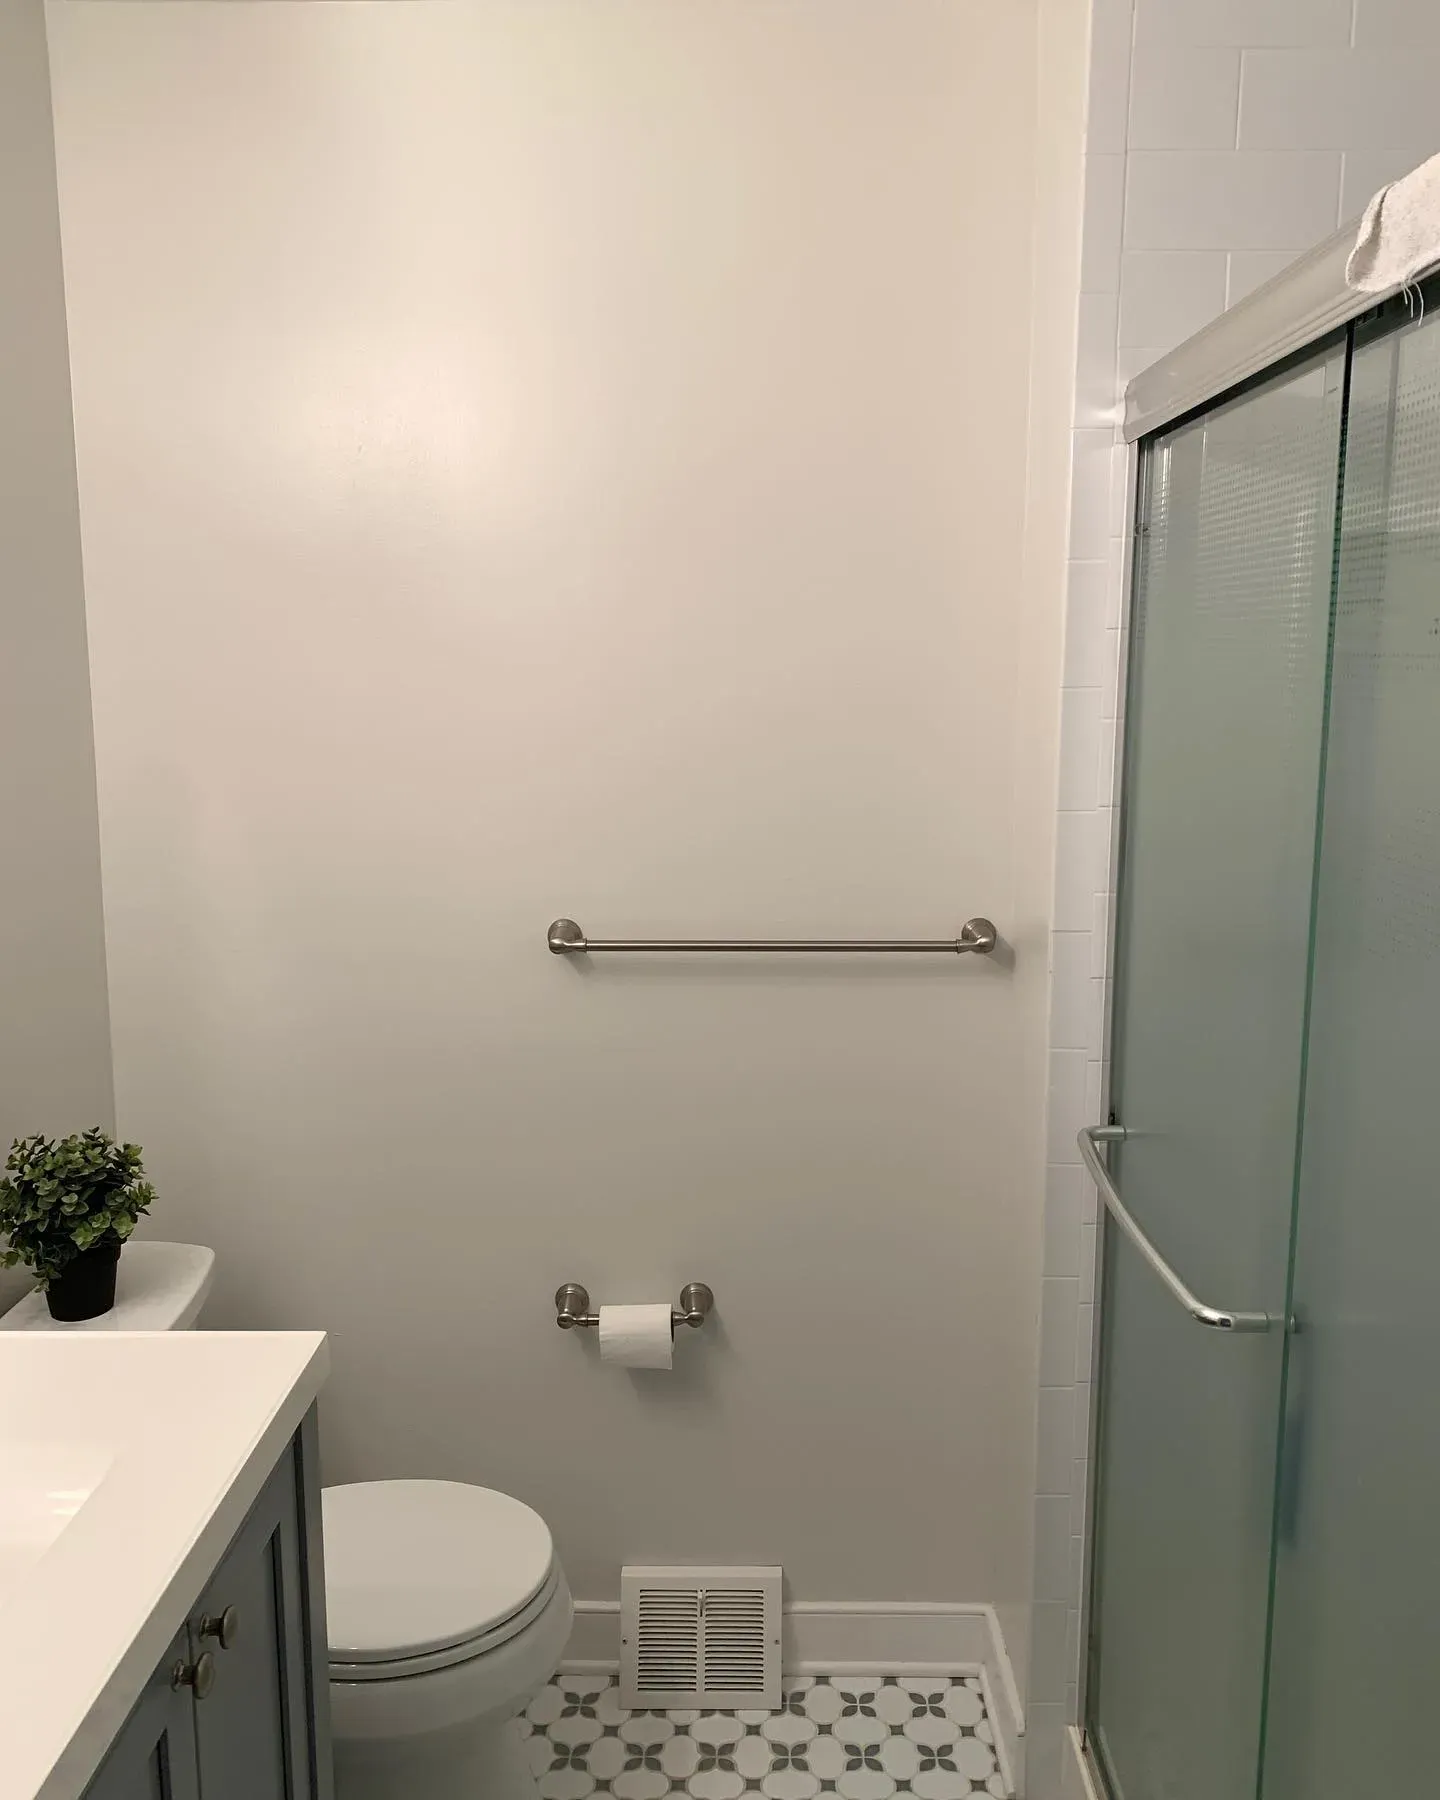 Behr Weathered White bathroom color review